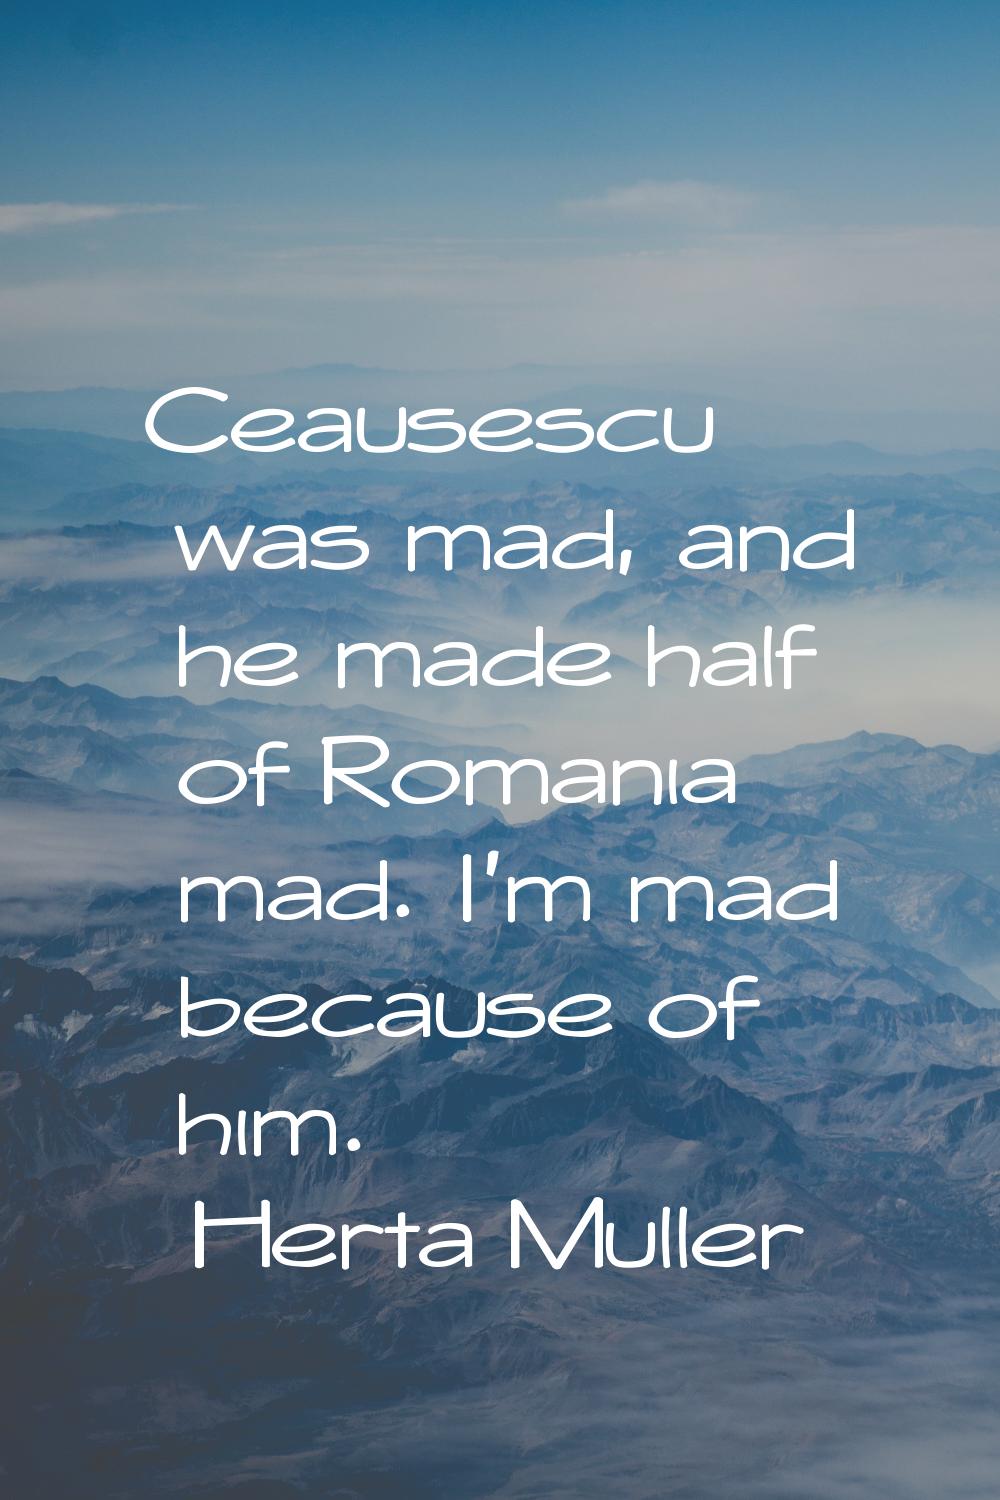 Ceausescu was mad, and he made half of Romania mad. I'm mad because of him.